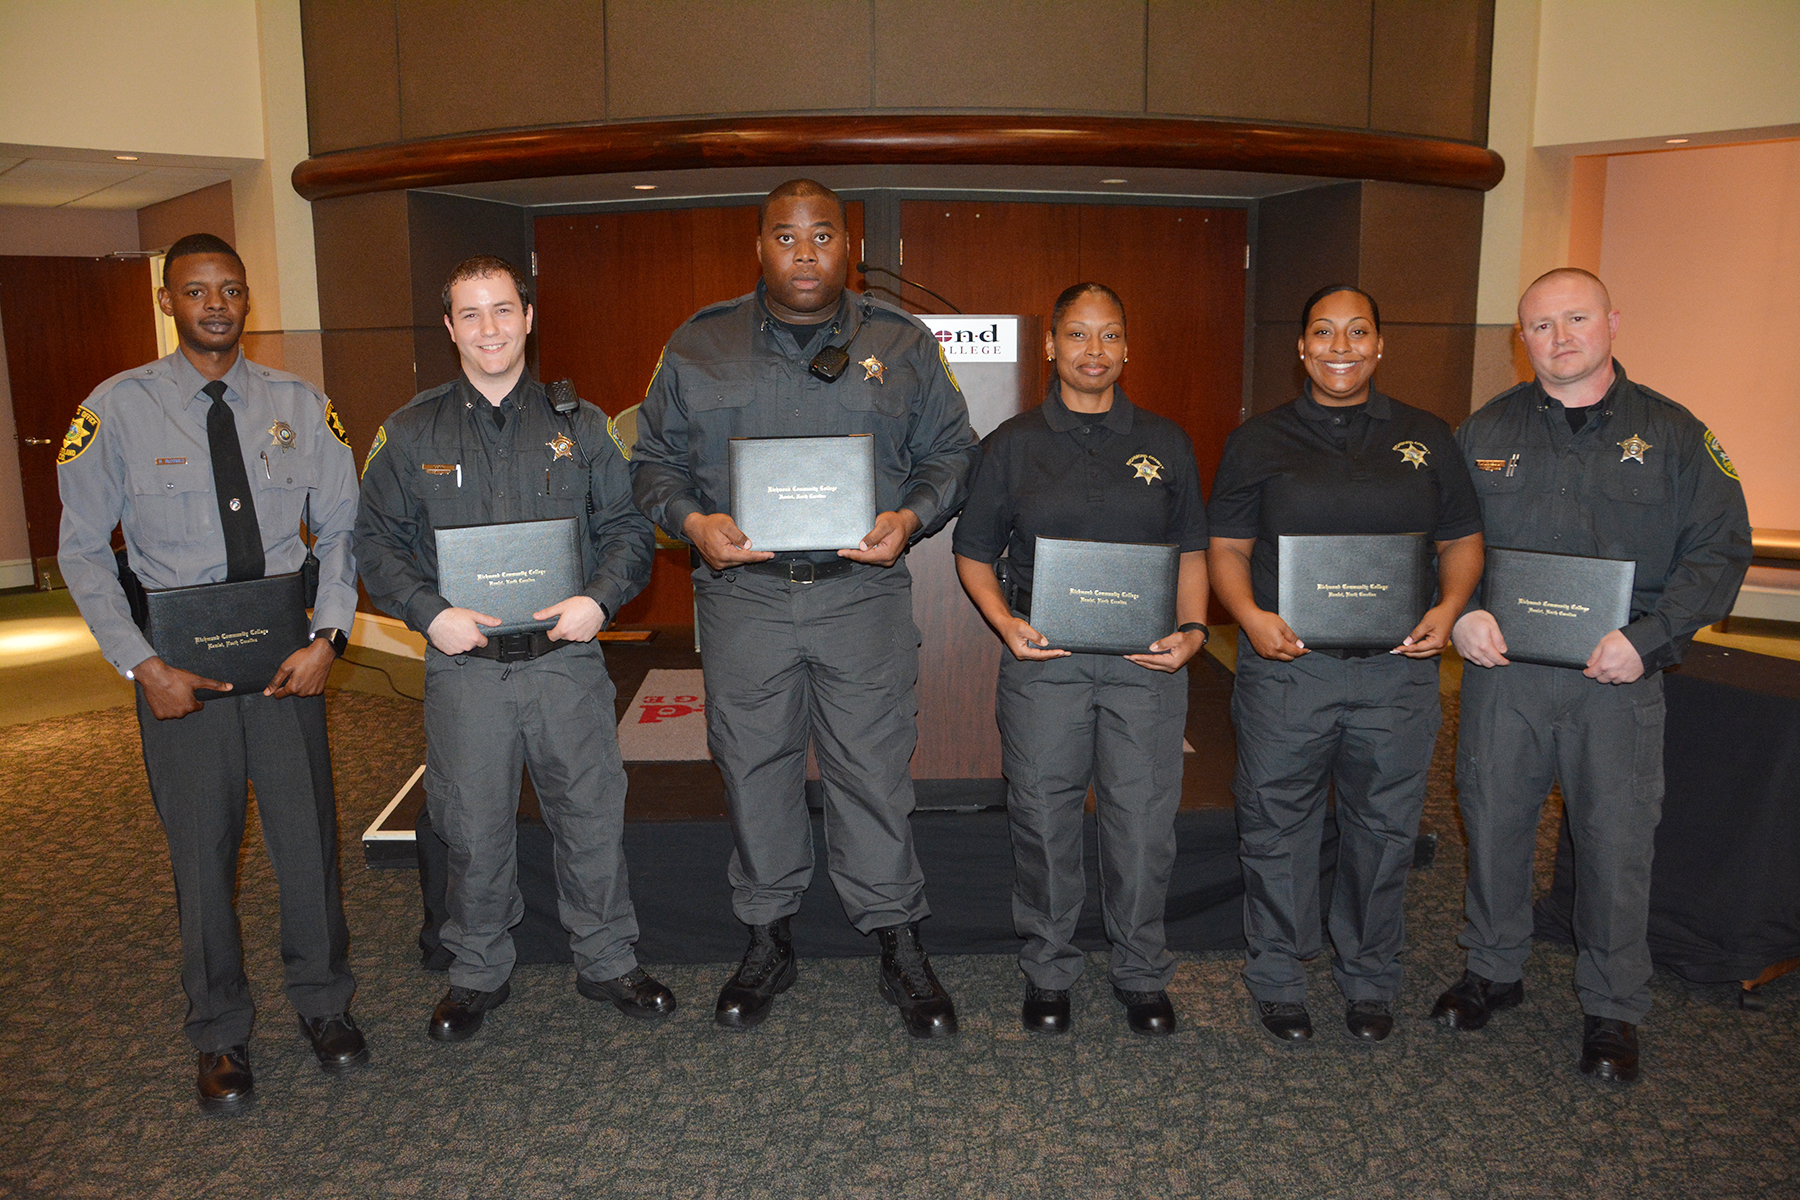 Pictured are the six graduates of the Detention Officer Certification Course offered through Richmond Community College. From left, are Meyer Jermaine McDonald, Dalton Timothy Burr, Emmanuel Lucas Crank, Pamela Suzette Hill, Amalia Marie Romero and David Wayne Howard.